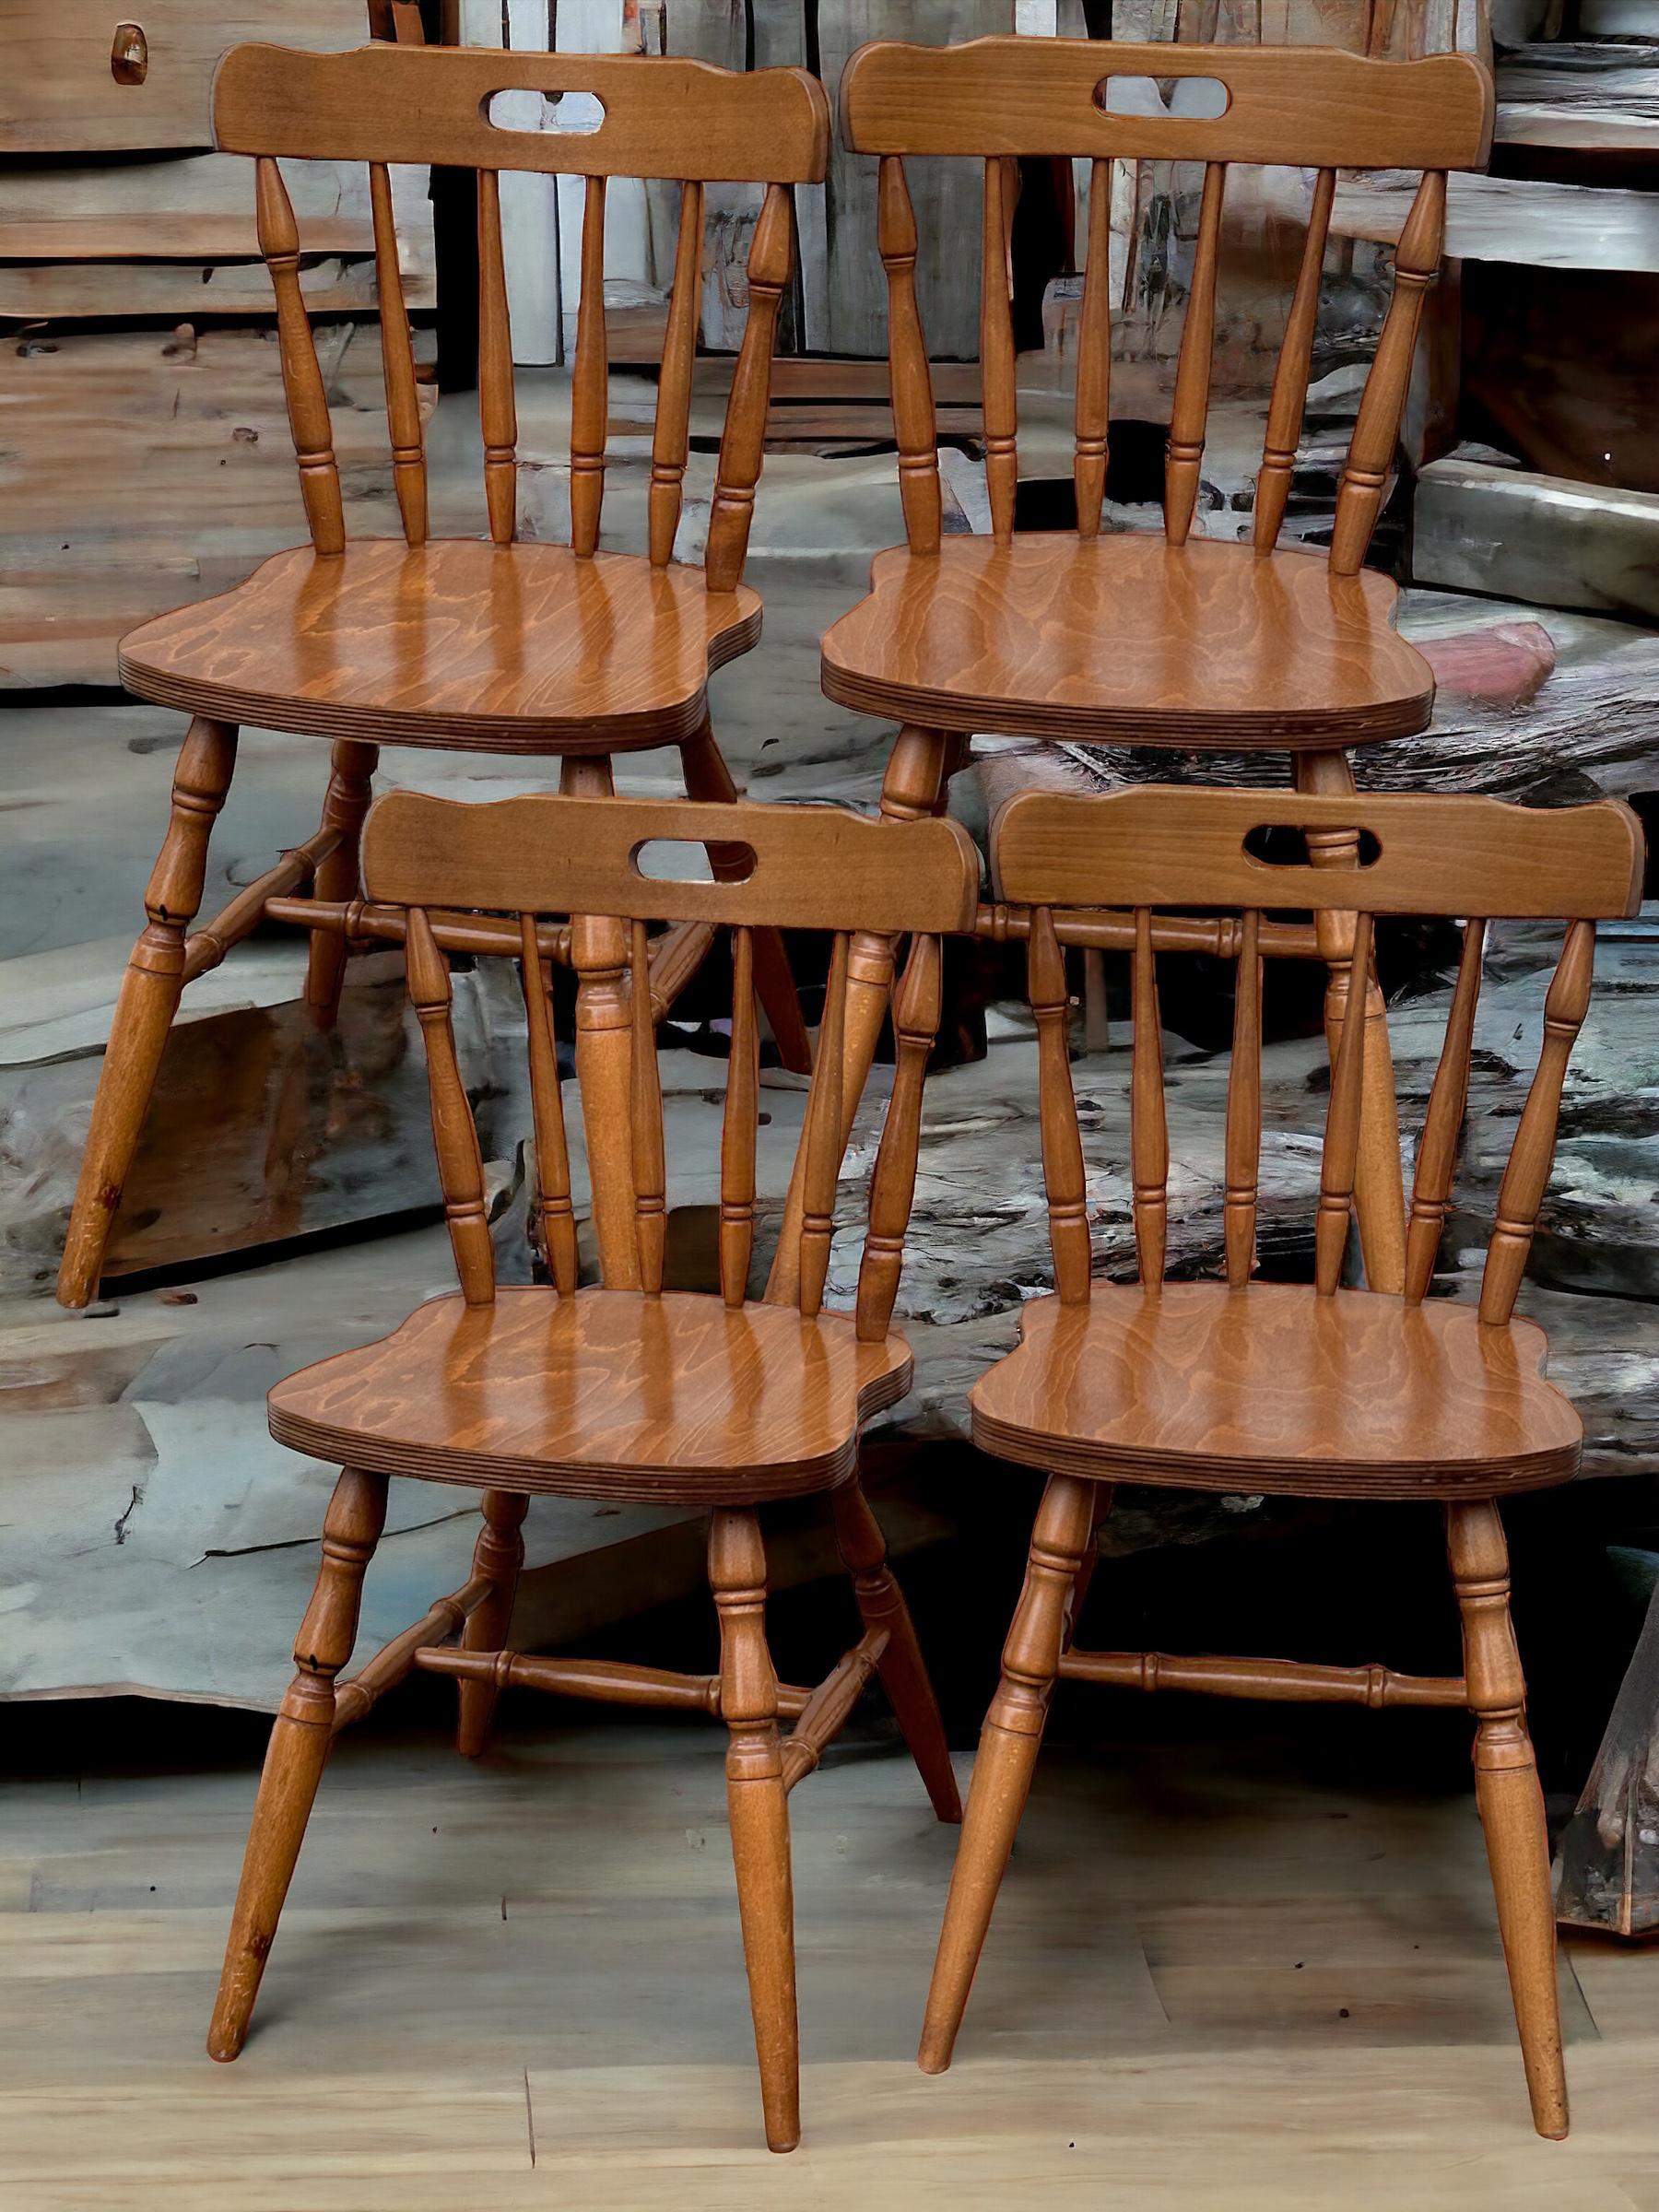 A set consisting of 4 chairs out of a tavern restaurant in Nuremberg Bavaria. These chairs were used in the restaurant's dining room for years. Each Stool is in very good, used condition, the backrests and legs are firm and stable. Nice addition to